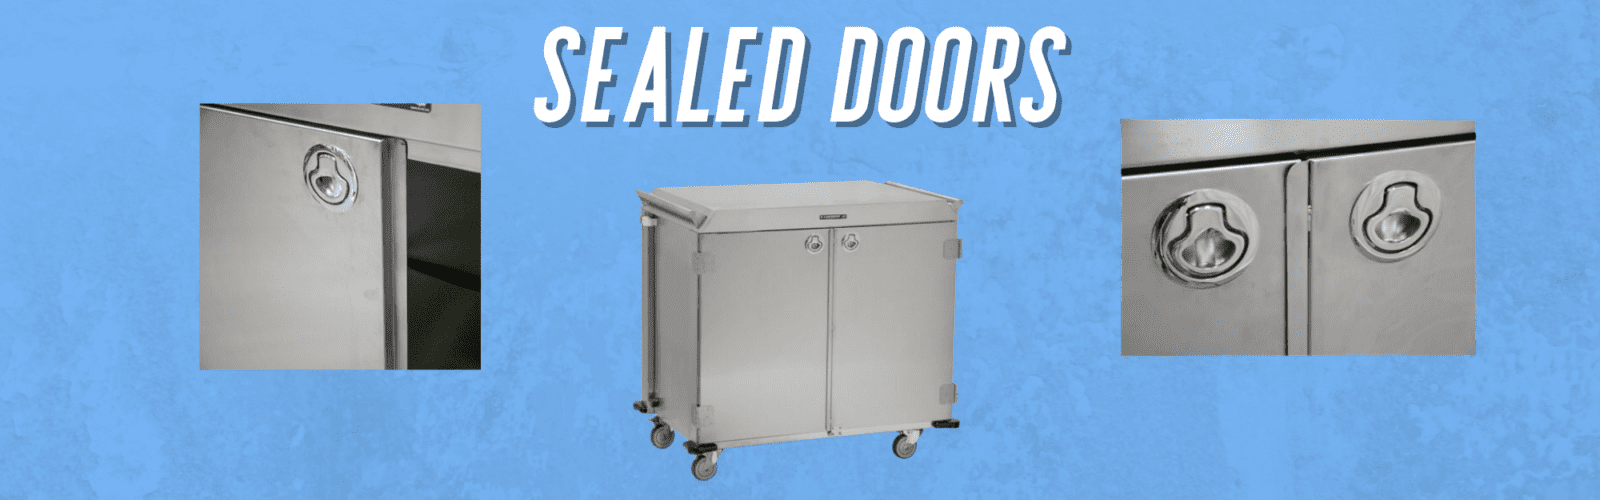 Sealed doors of a closed case cart